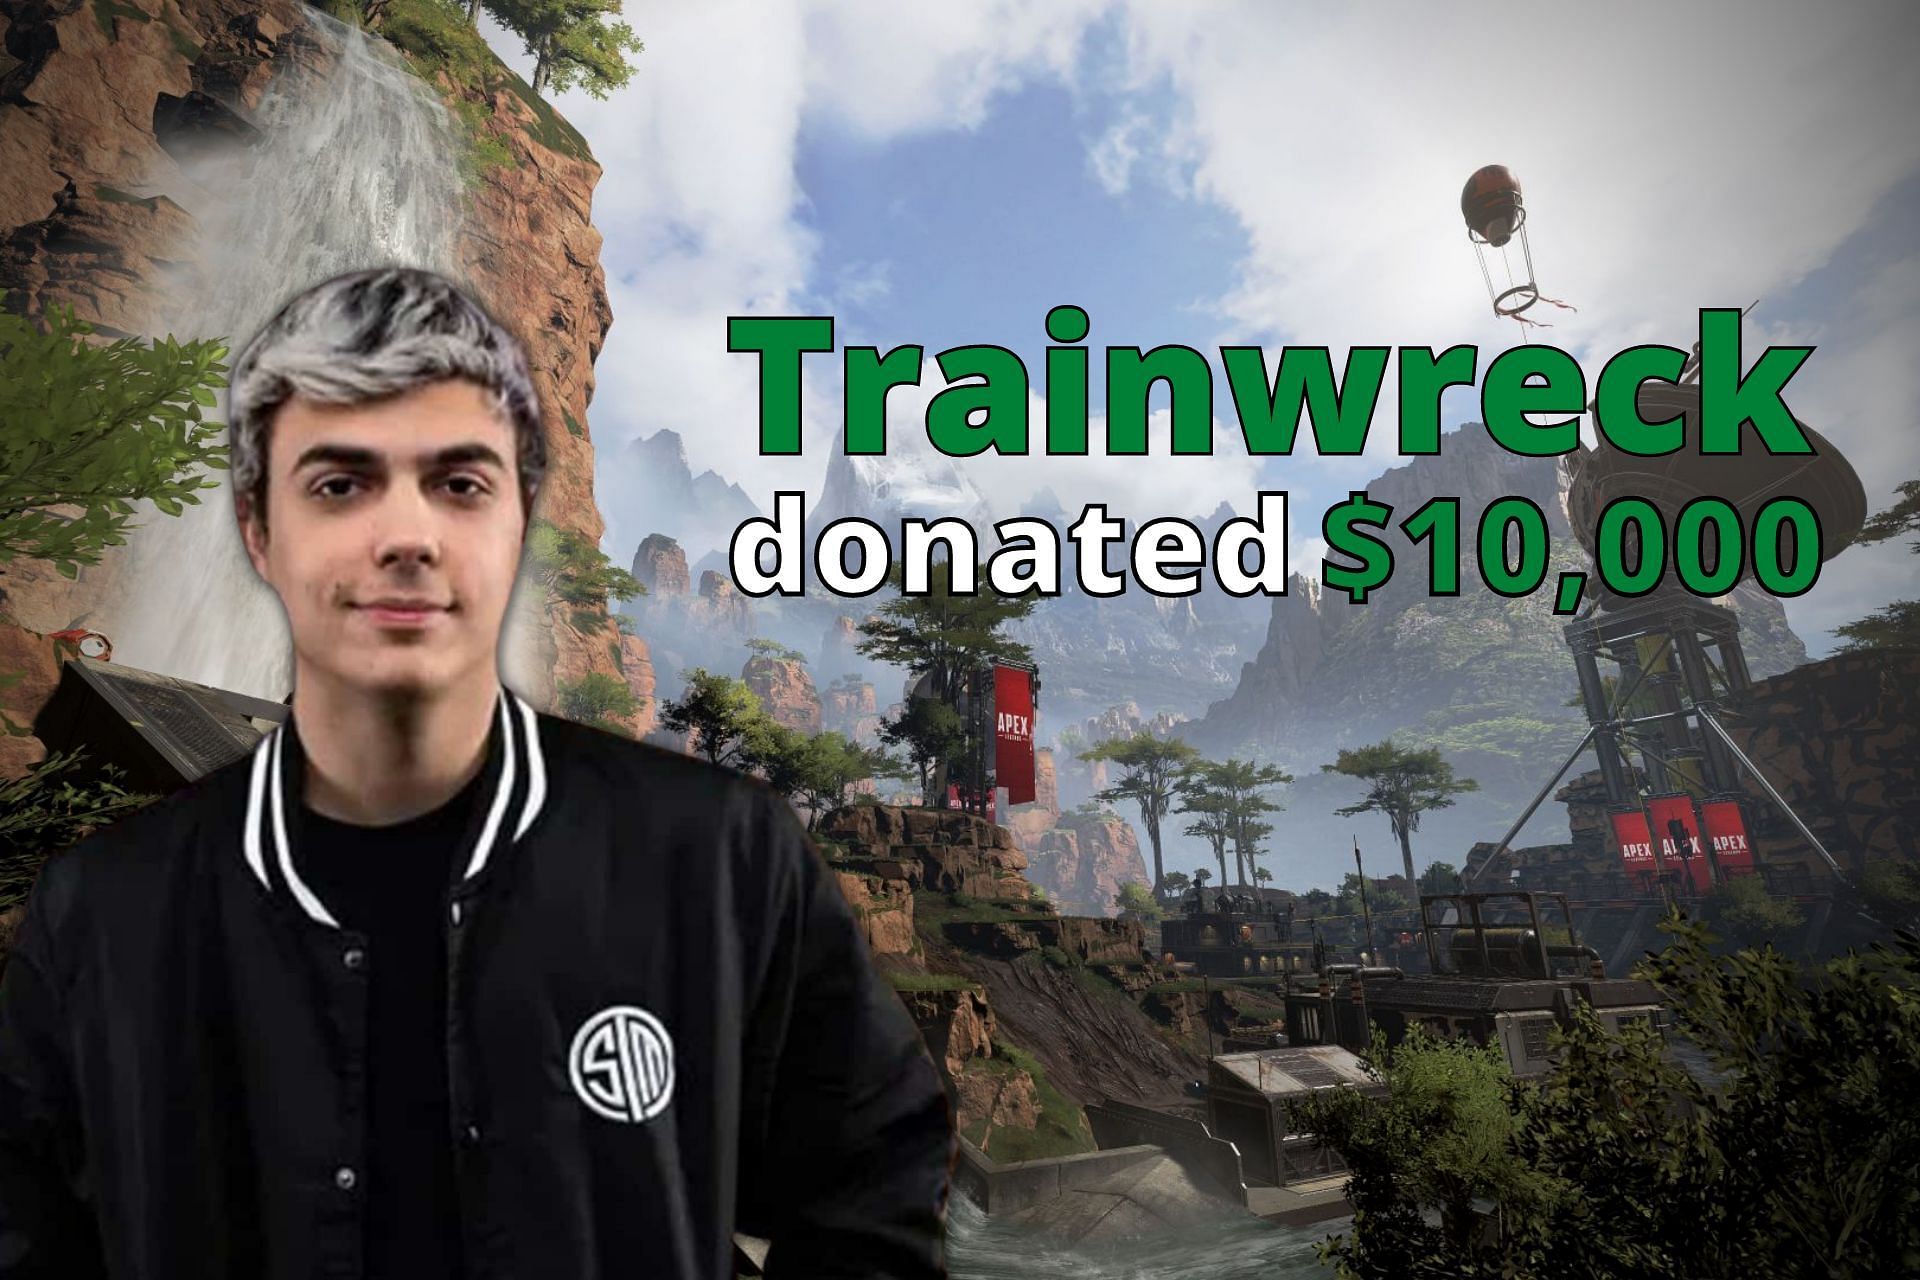 ImperialHal stunned after discovering $10,000 donation from Trainwreck (Image via Sportskeeda)